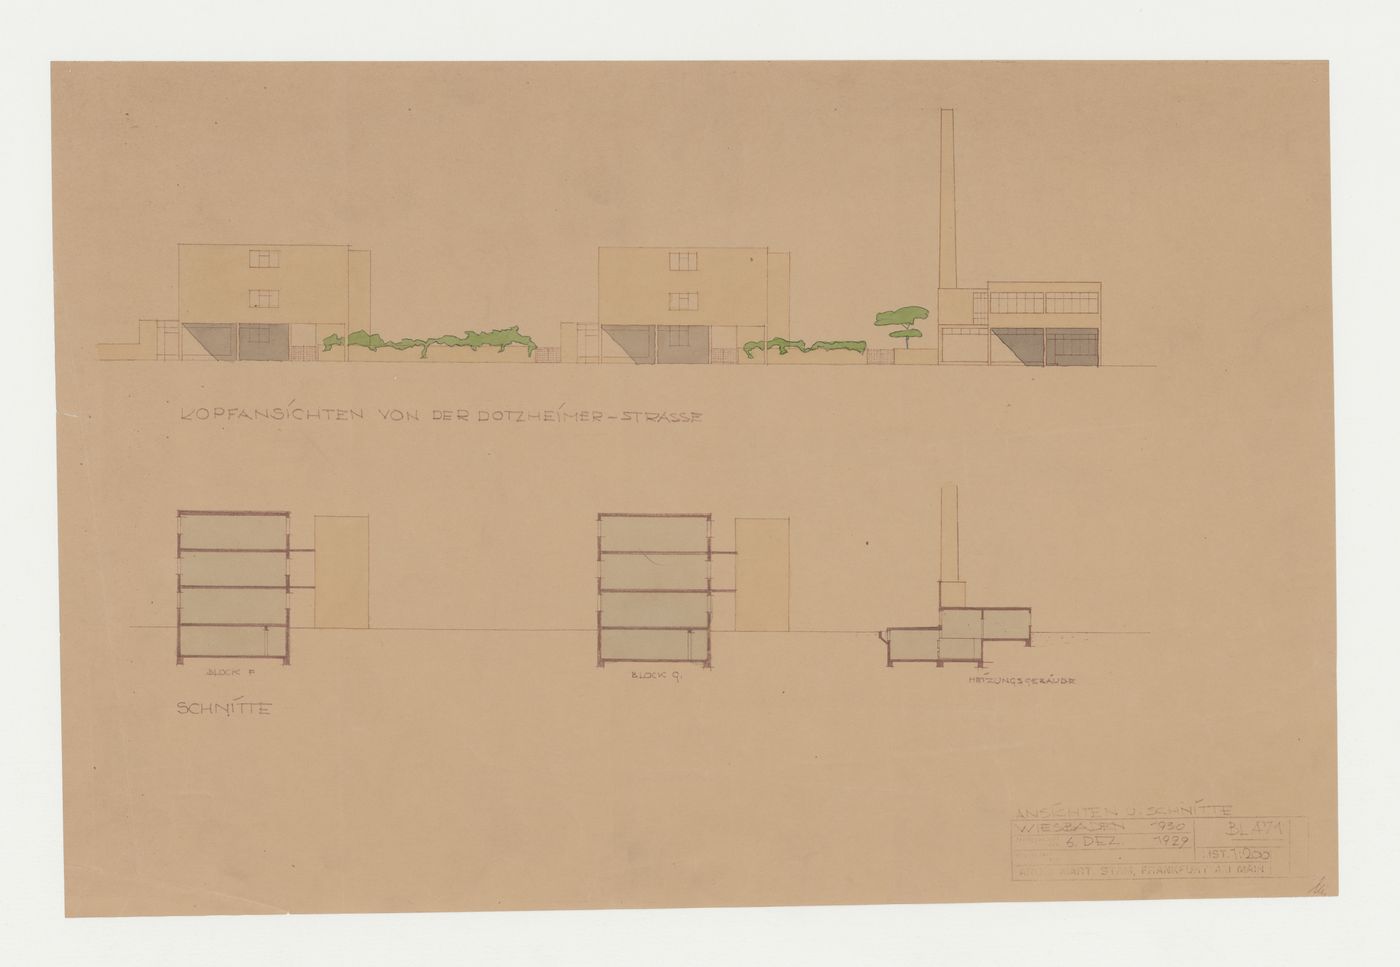 Elevations and sections for housing units and a heating systems building, Wiesbaden, Germany